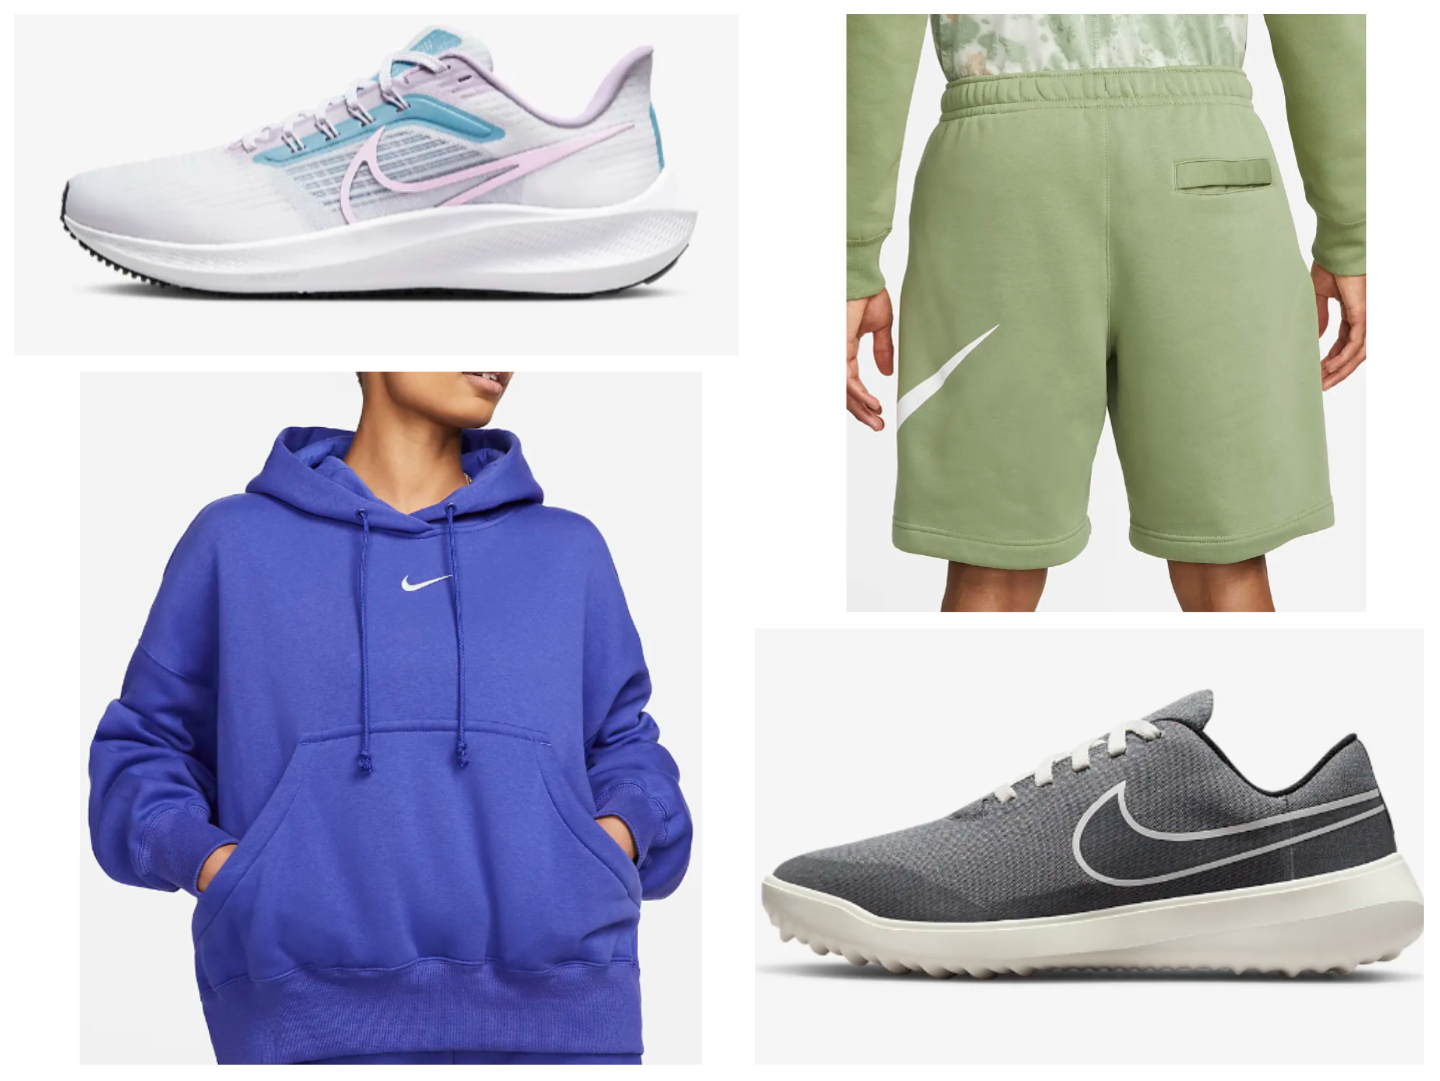 Nike's Black Friday save on hoodies, running shoes and more - mlive.com